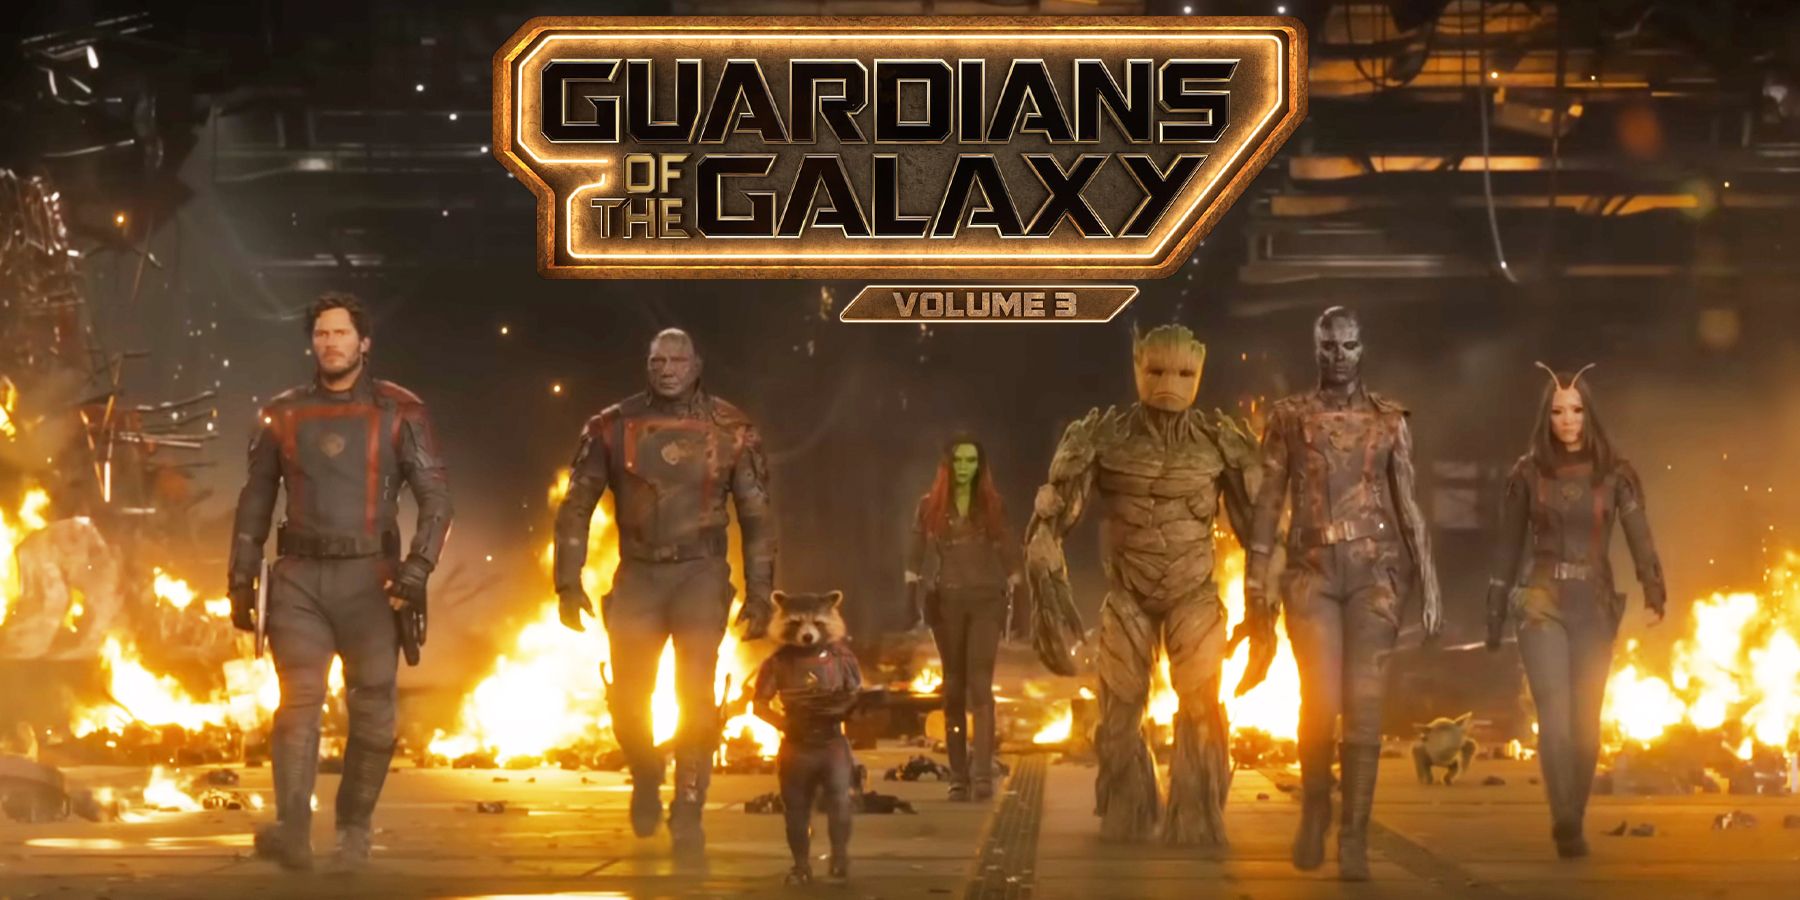 The Guardians of the Galaxy team with the Vol.3 logo